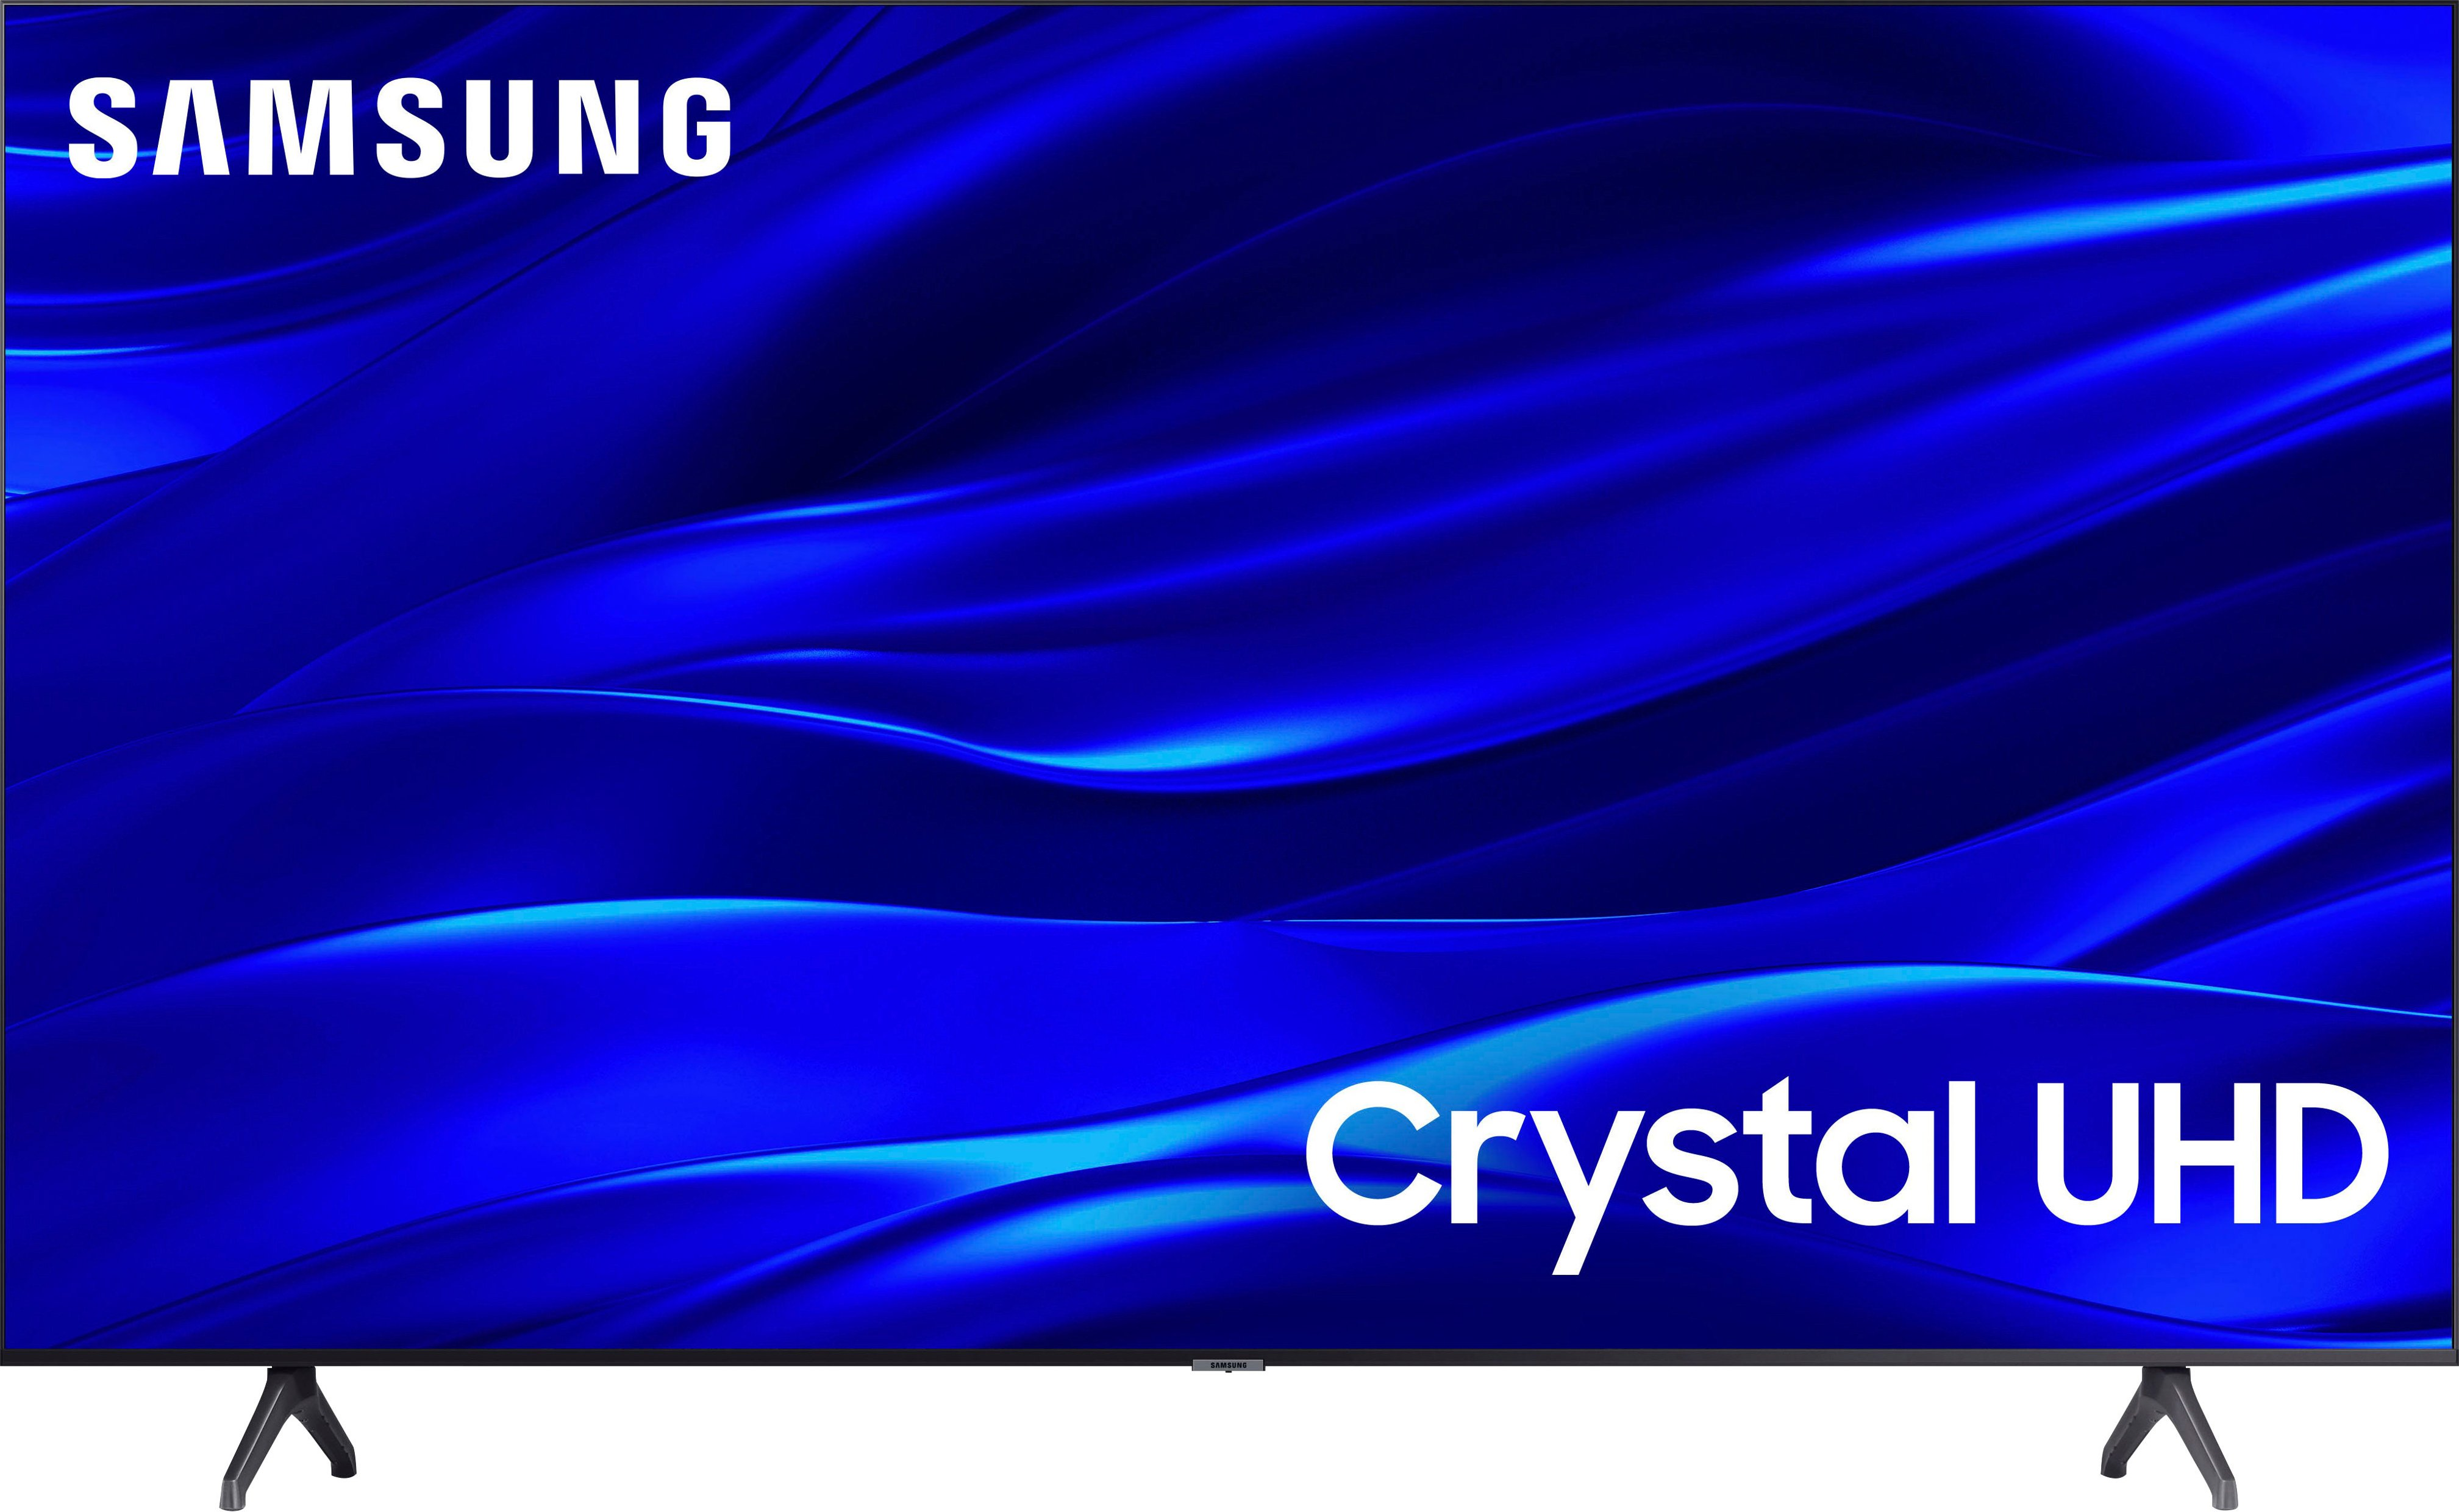 Samsung - 85" Class TU690T Crystal UHD 4K Smart Tizen TV, $900 for Plus or Total members, $1000 for non-members, free shipping, Best Buy $1000